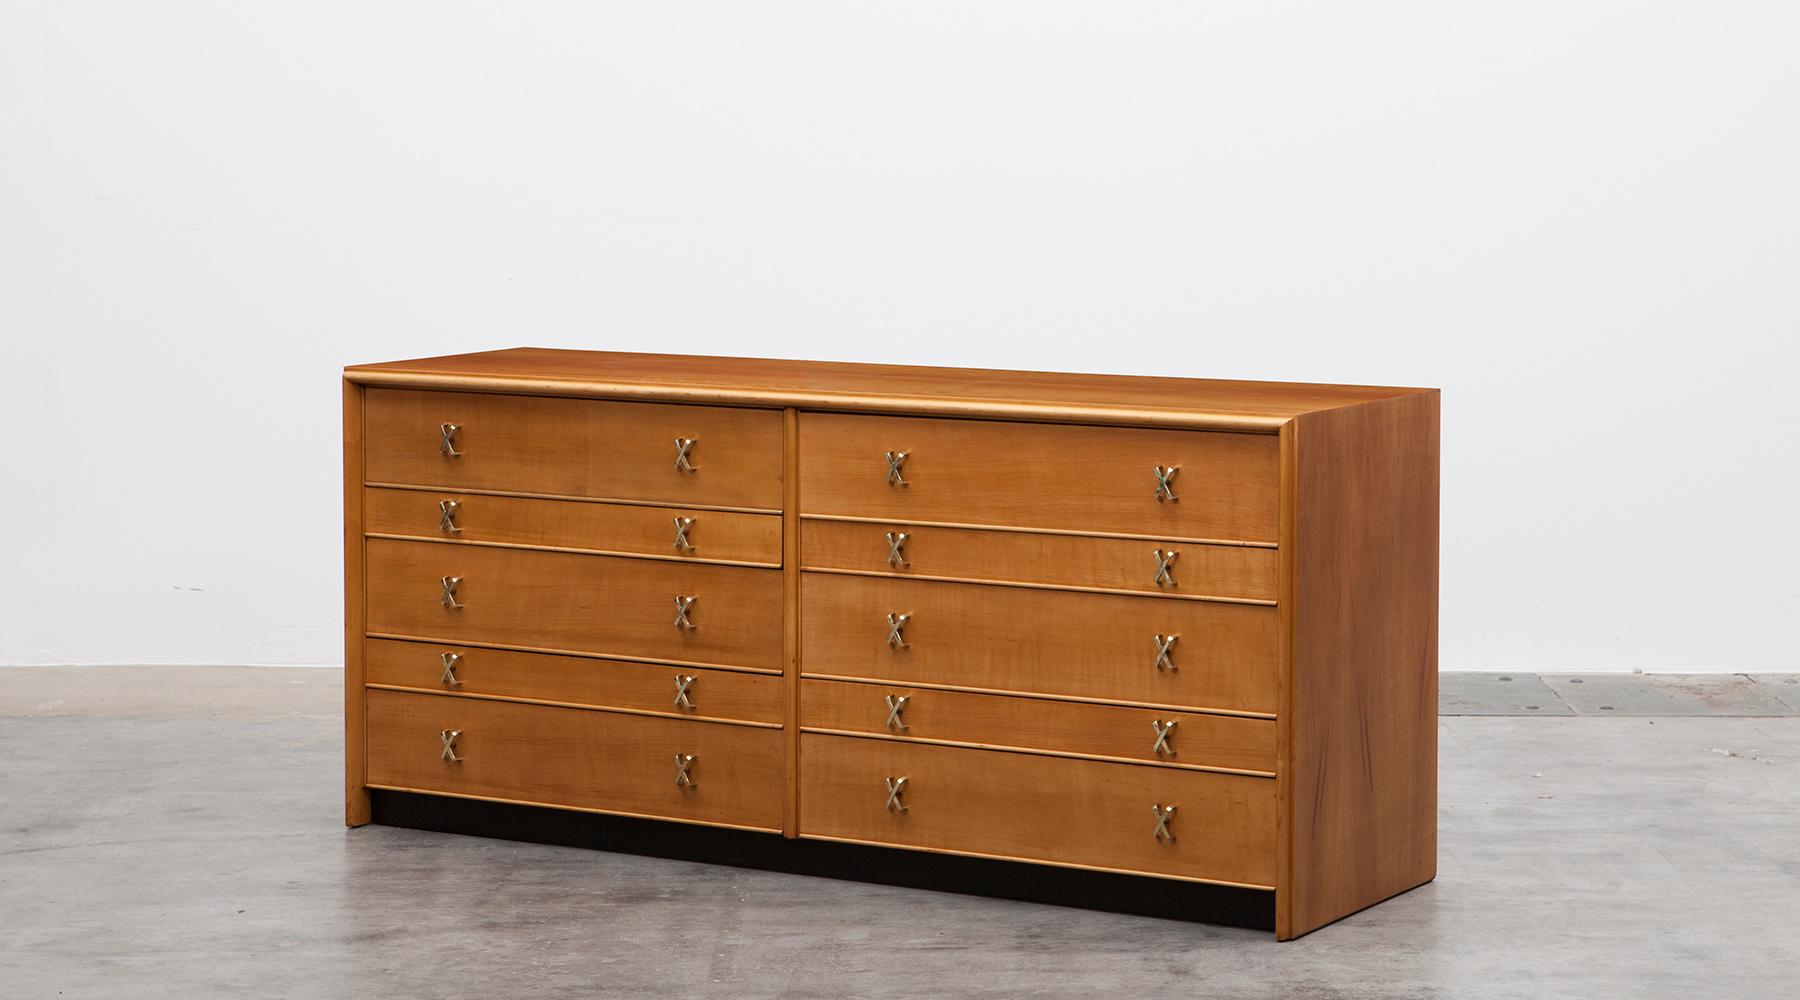 Sideboard in birch, brass details by Paul Frankl, USA, 1950.

The sideboard designed by Paul Frankl in birch has ten drawers in two different sizes. The small drawers are internally divided with small compartments. The famous Paul Frankl 